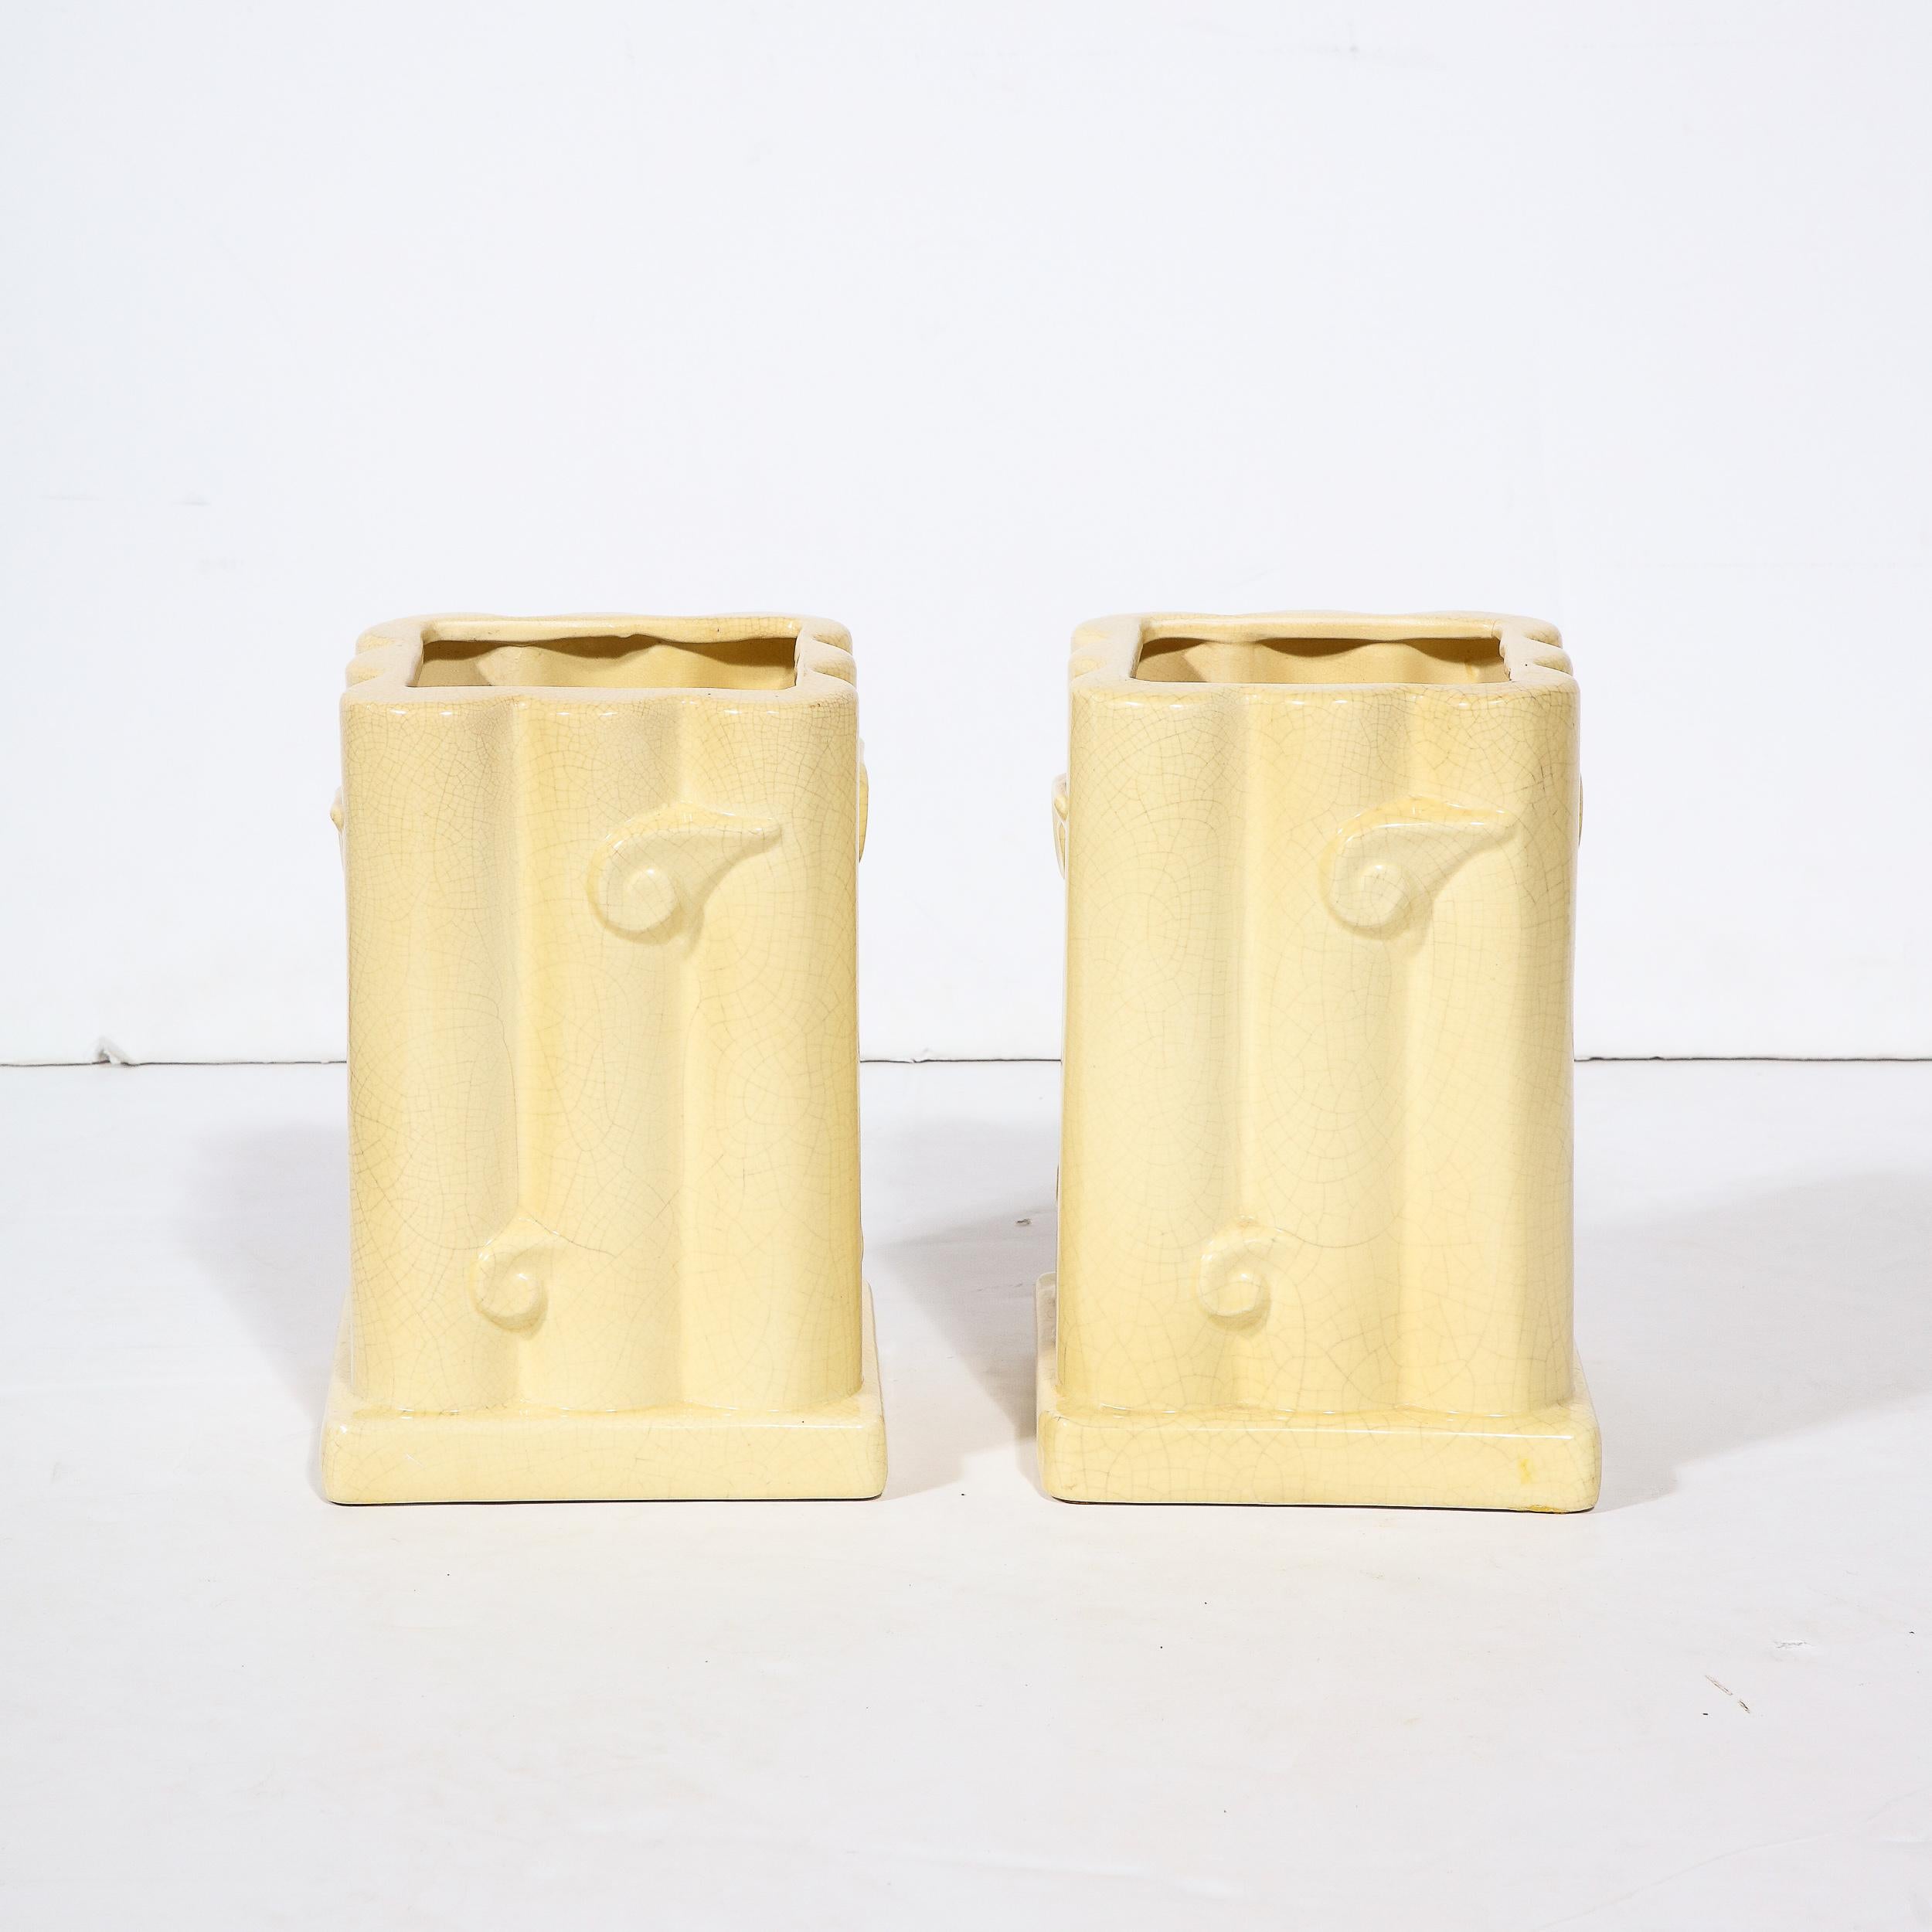 This elegant pair of Art Deco ceramic vases were realized in Belgium circa 1930. They feature rectangular volumetric bodies with square bases that cantilever beyond the perimeter of each form. The silhouettes vases are composed of columnar forms